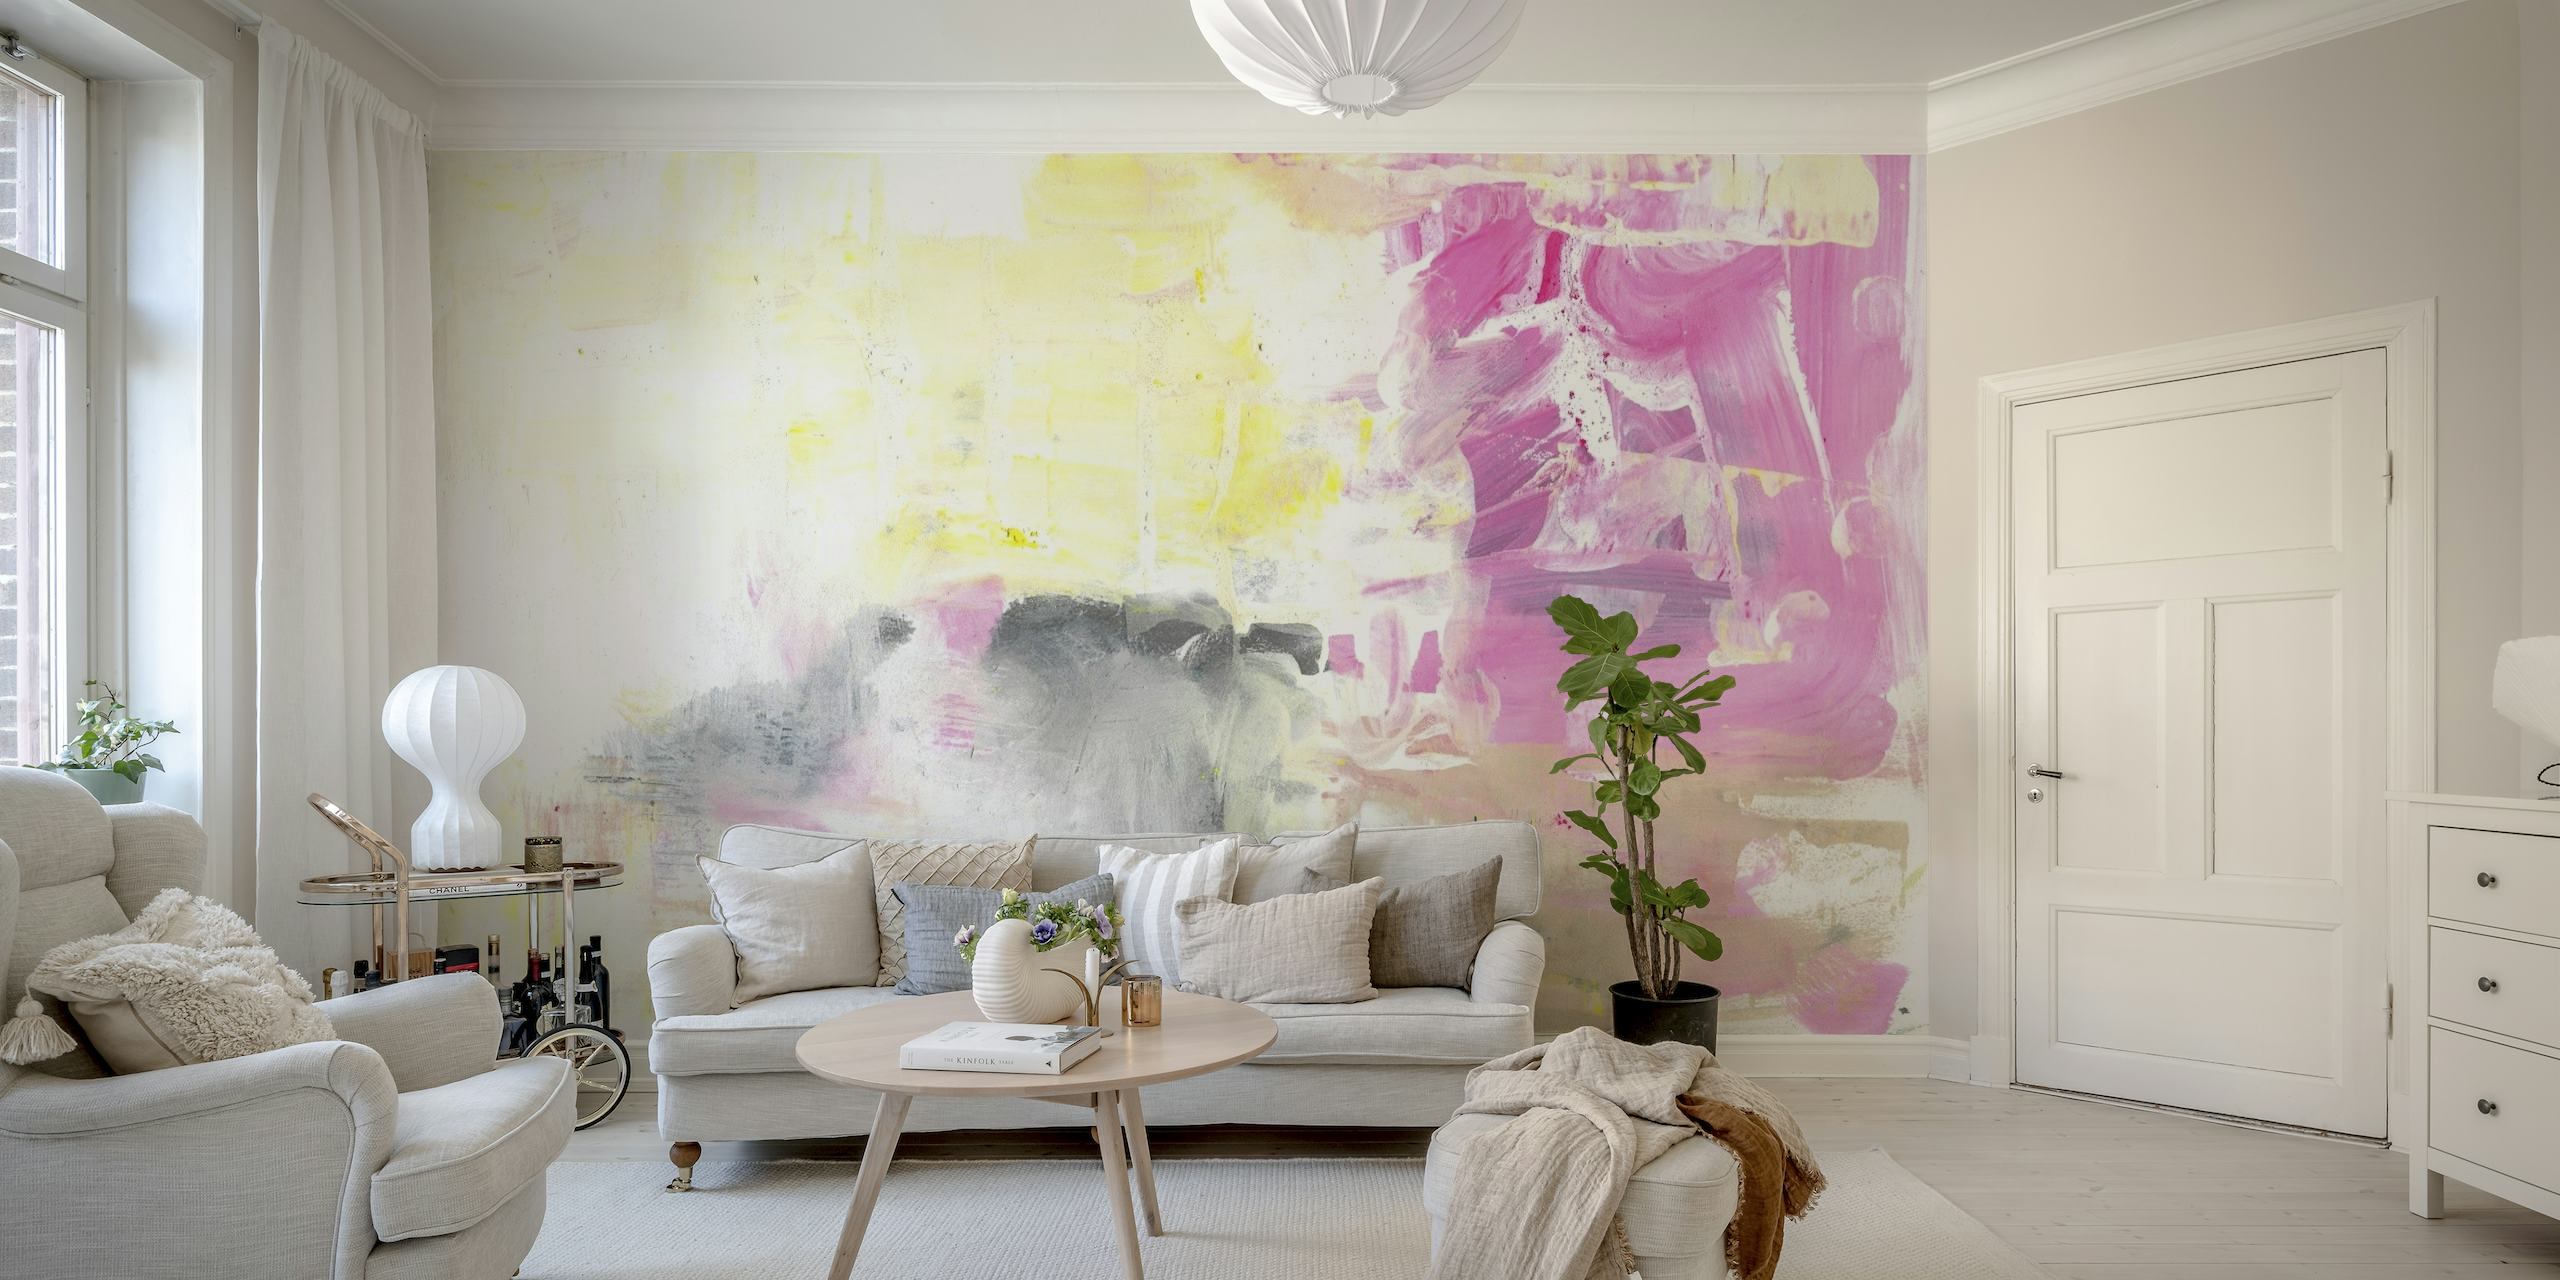 Abstract Painting No 17 wall mural featuring soft pink, gray, and white tones with expressive brushwork